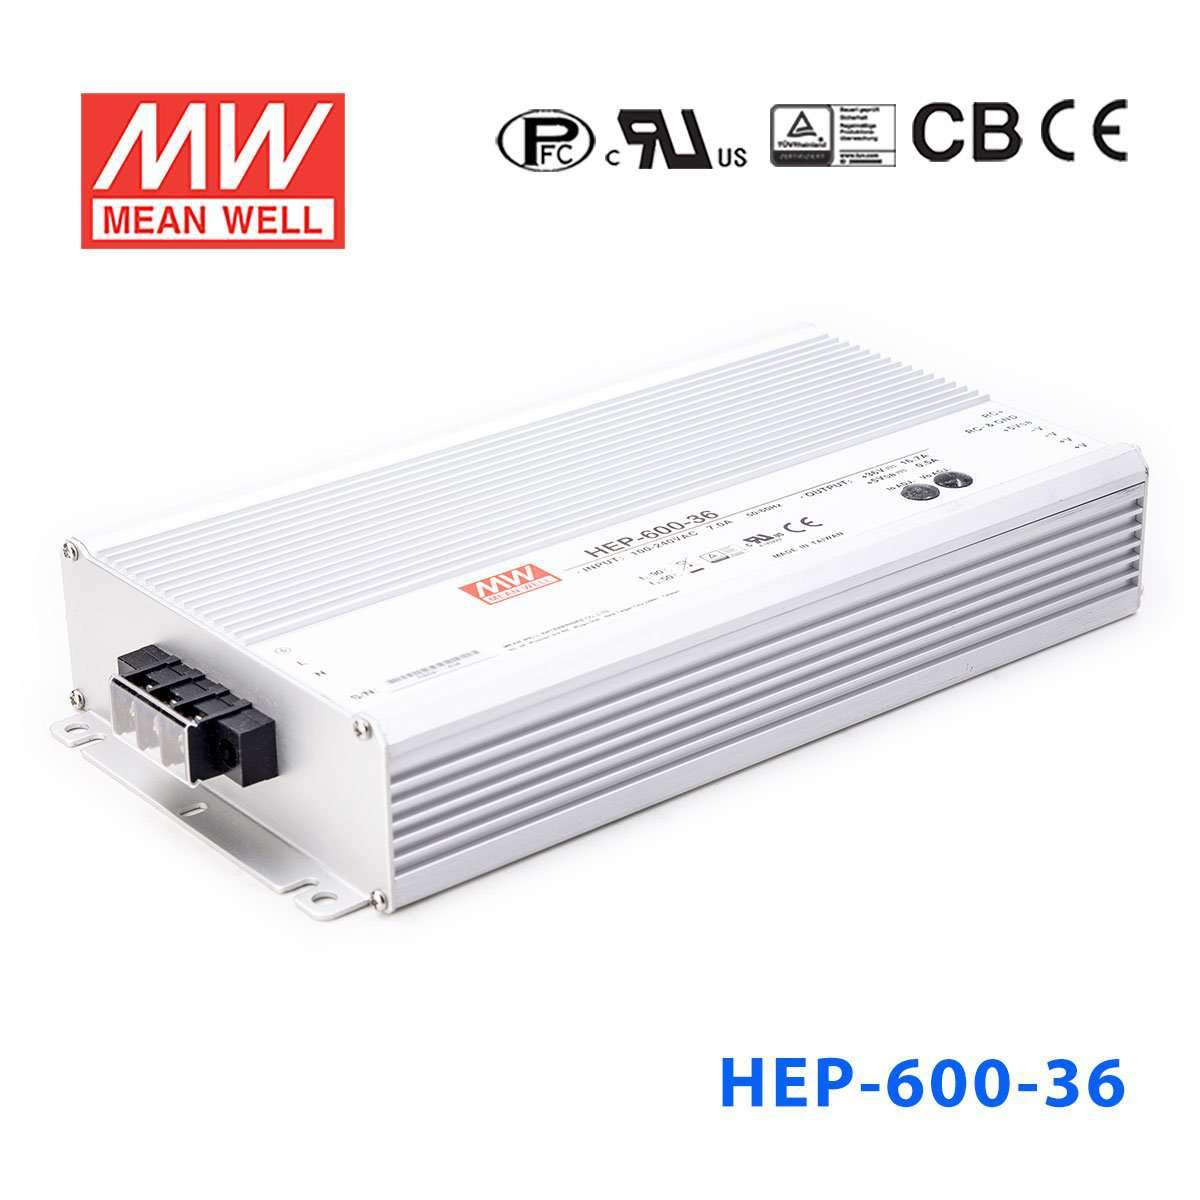 Mean Well HEP-600-36 Power Supply 601.2W 36V